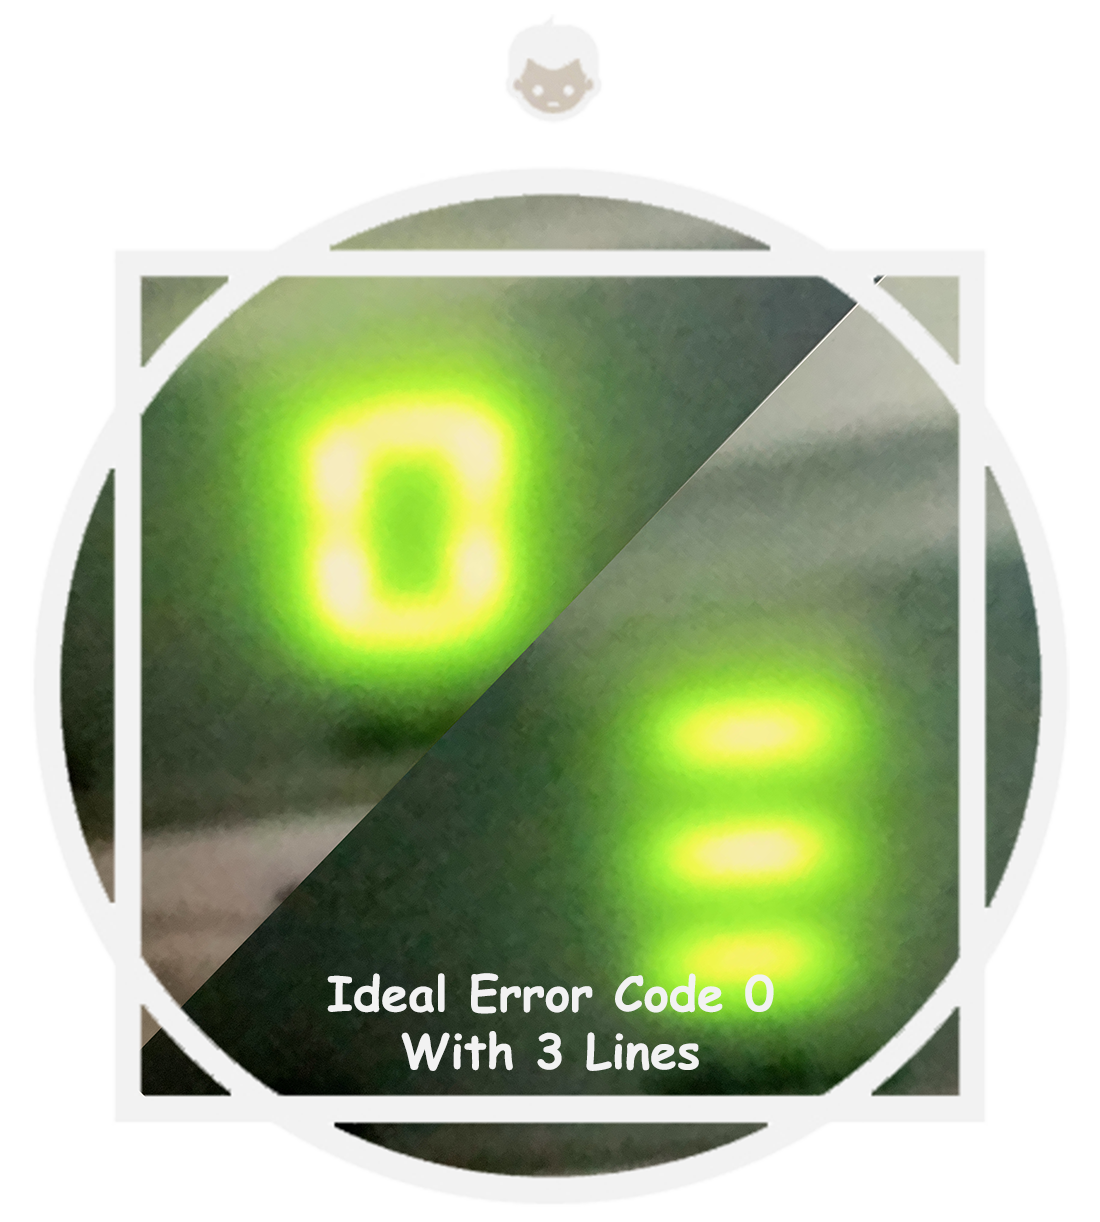 Ideal error code 0 with 3 lines